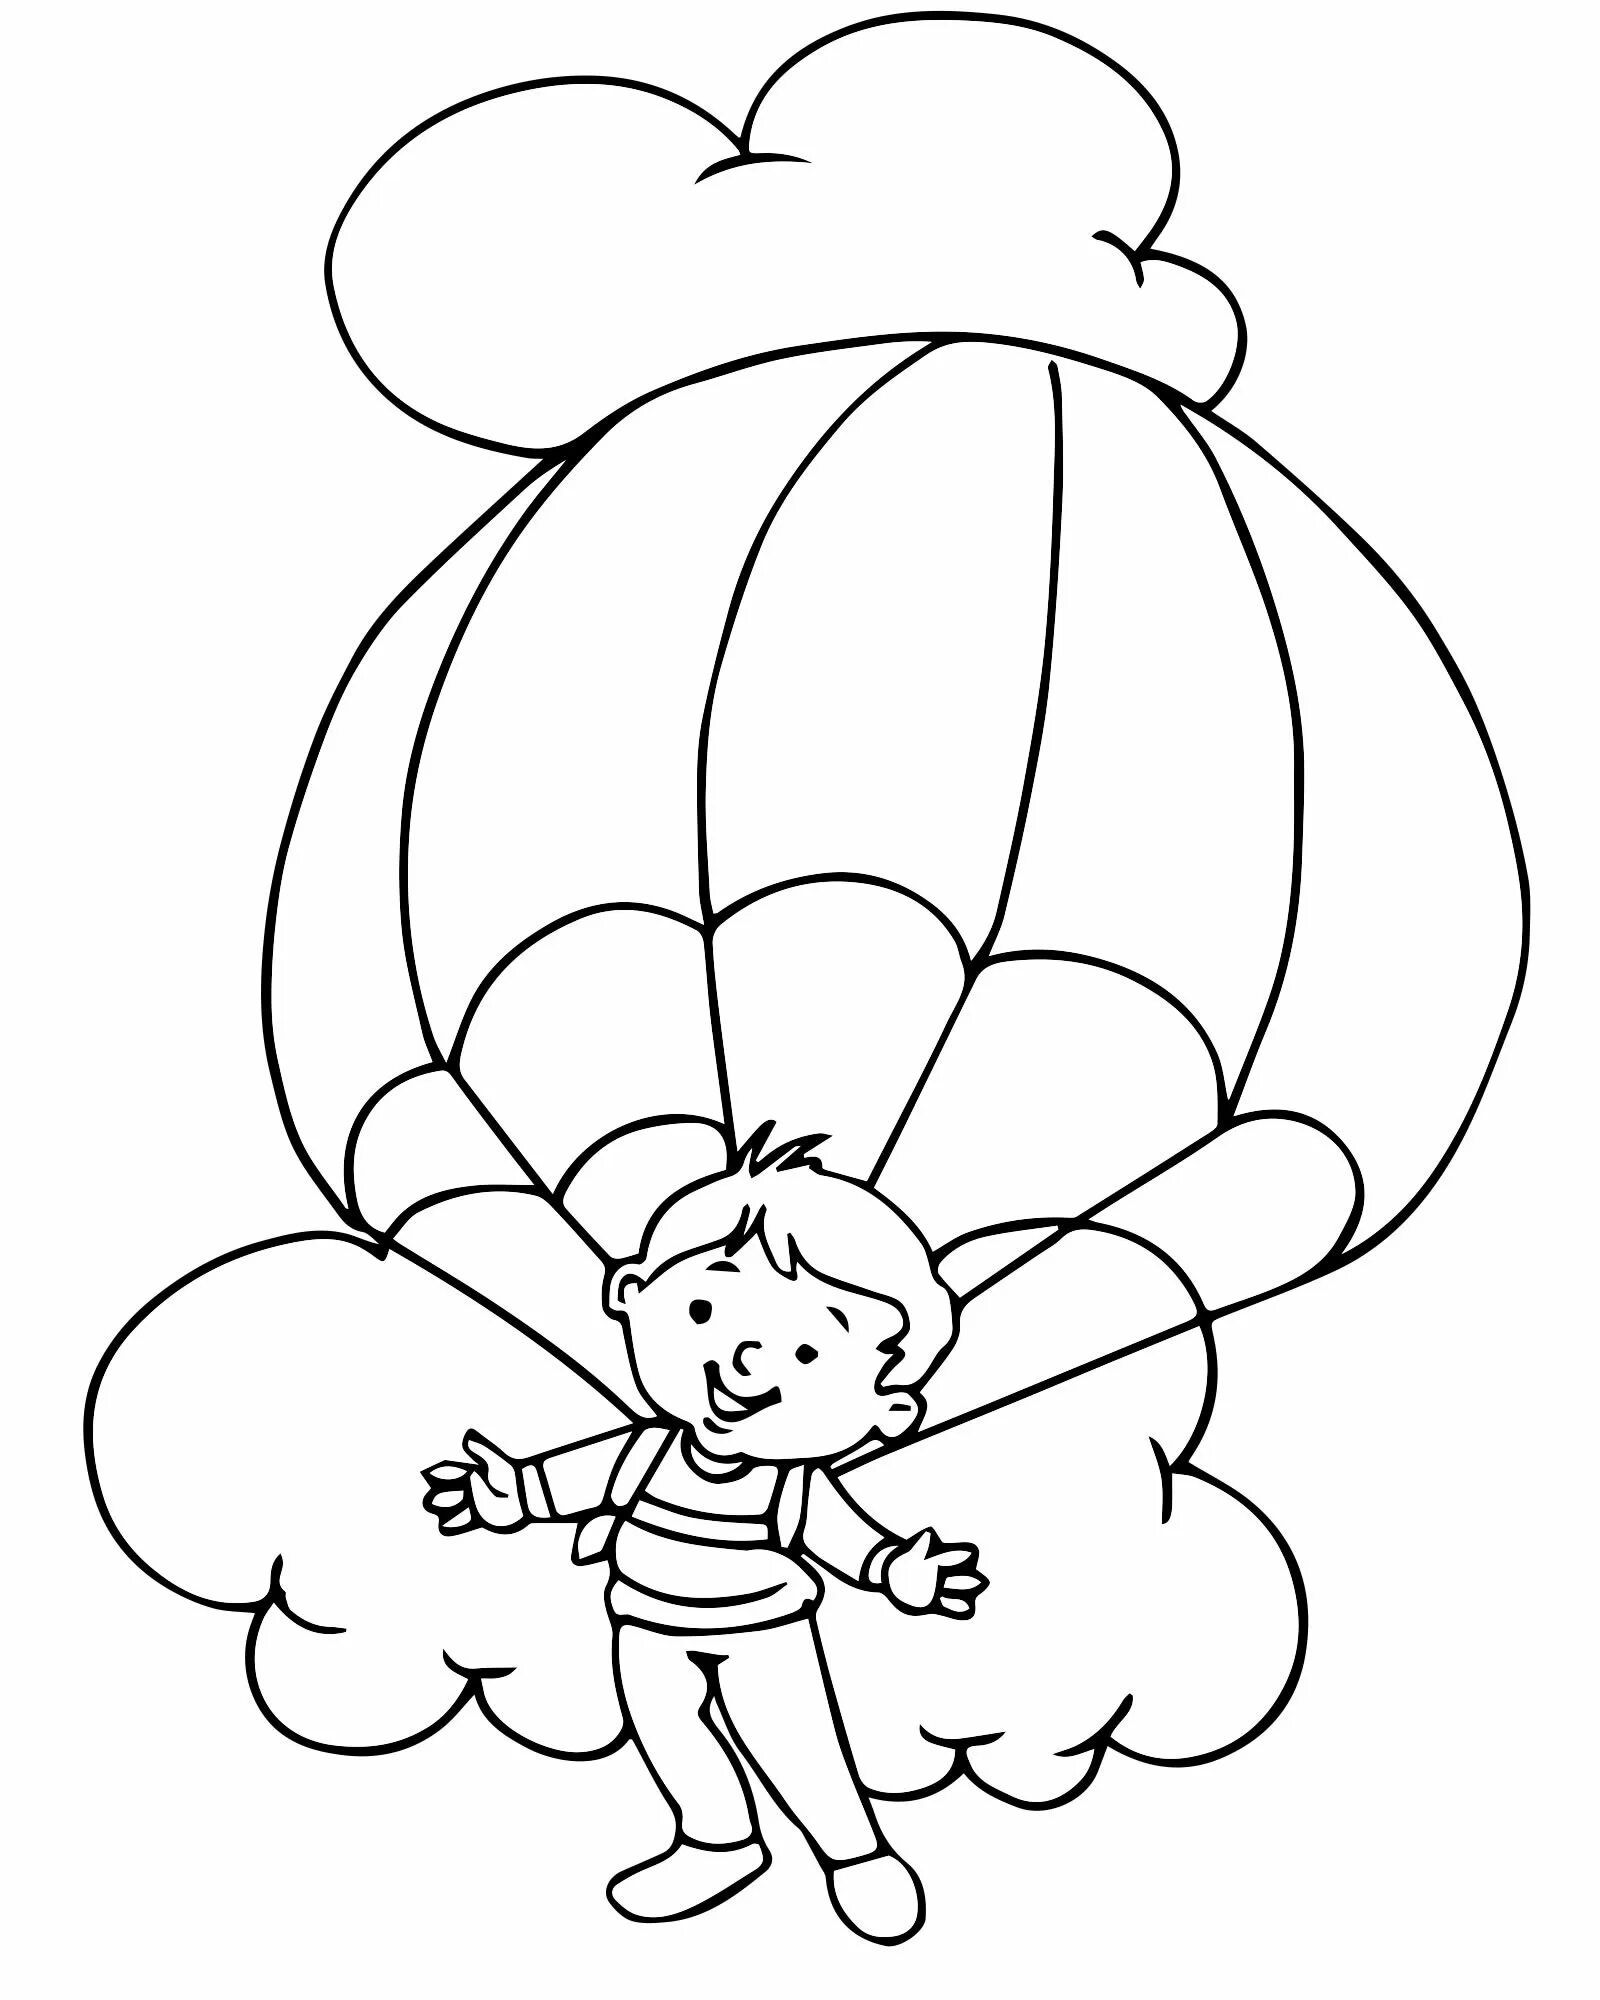 Fascinating parachute coloring book for kids